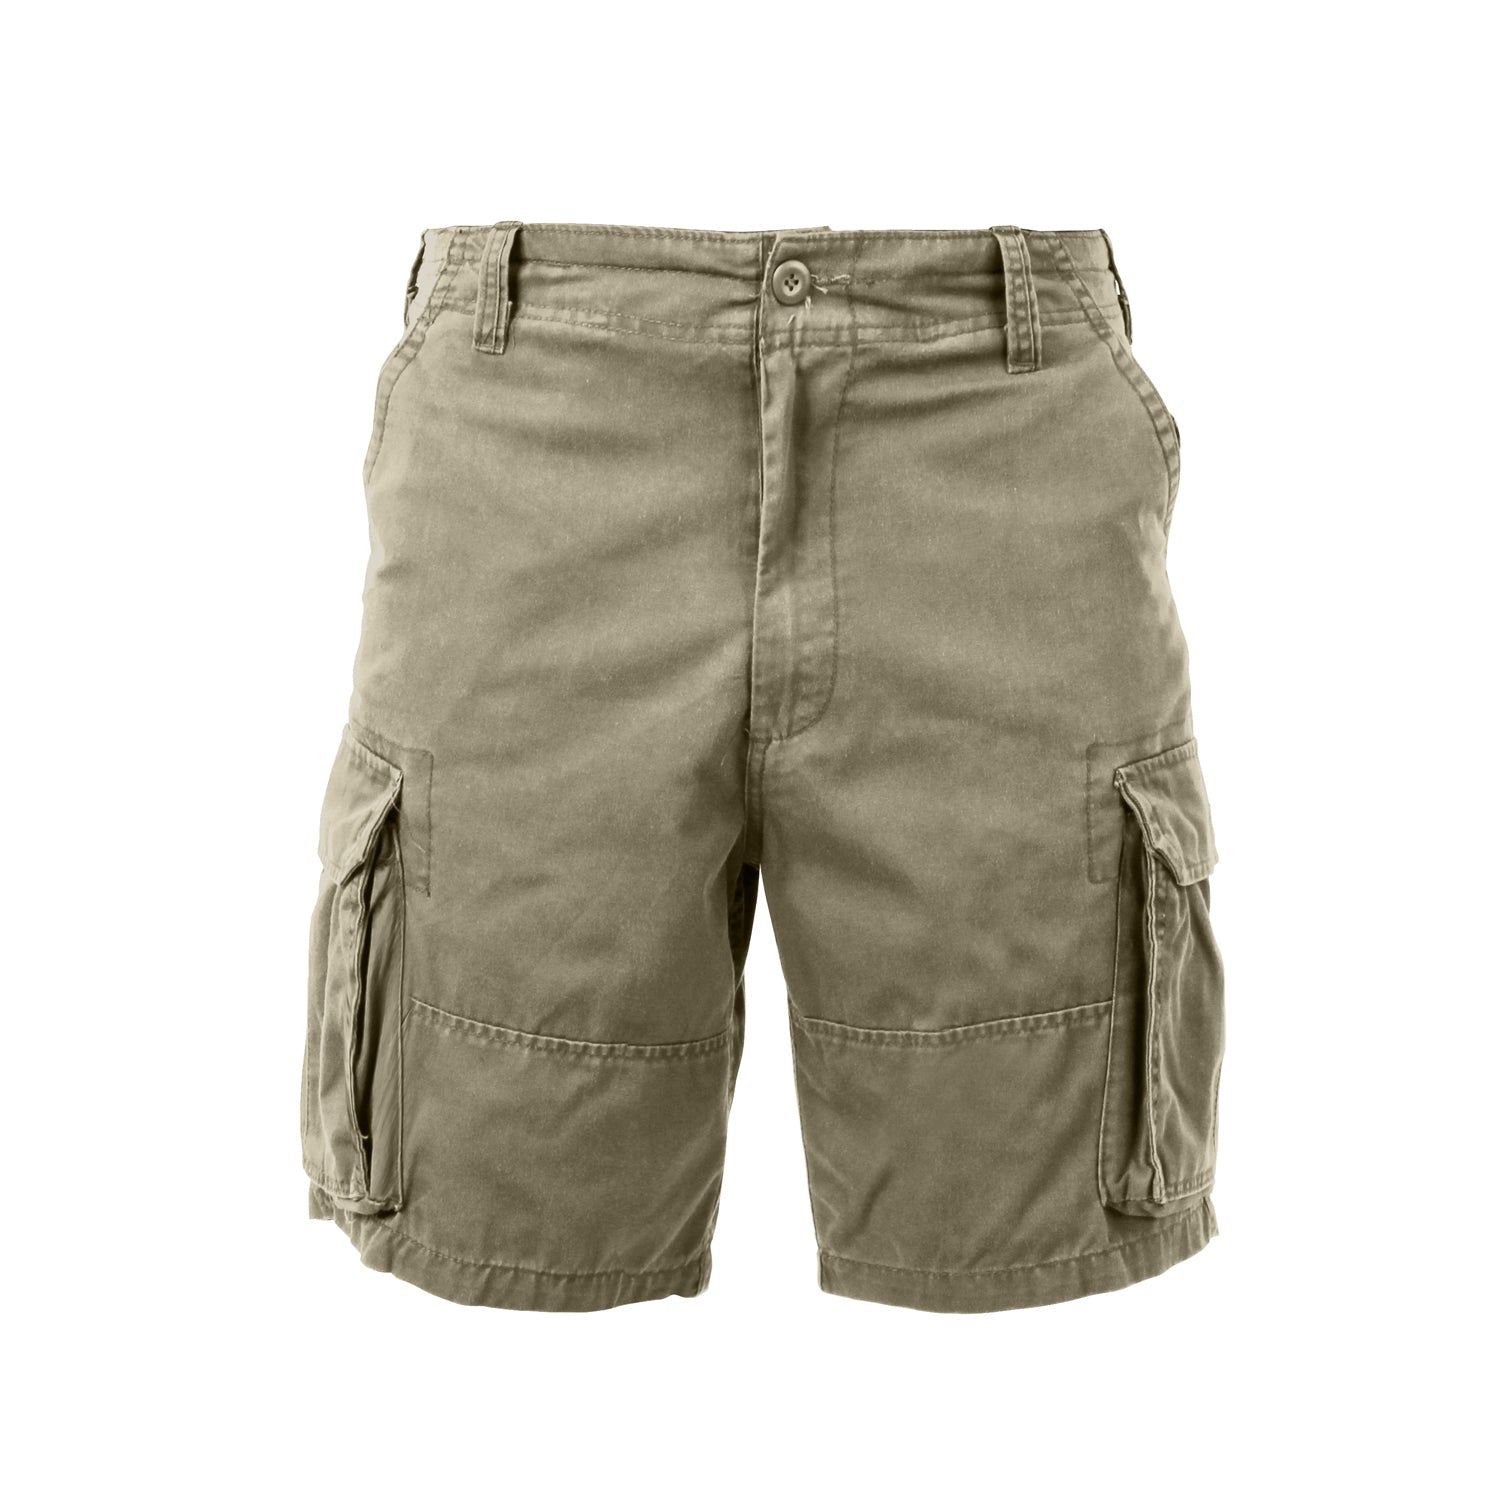 Rothco Vintage Paratrooper Cargo Shorts Olive Drab (2170)